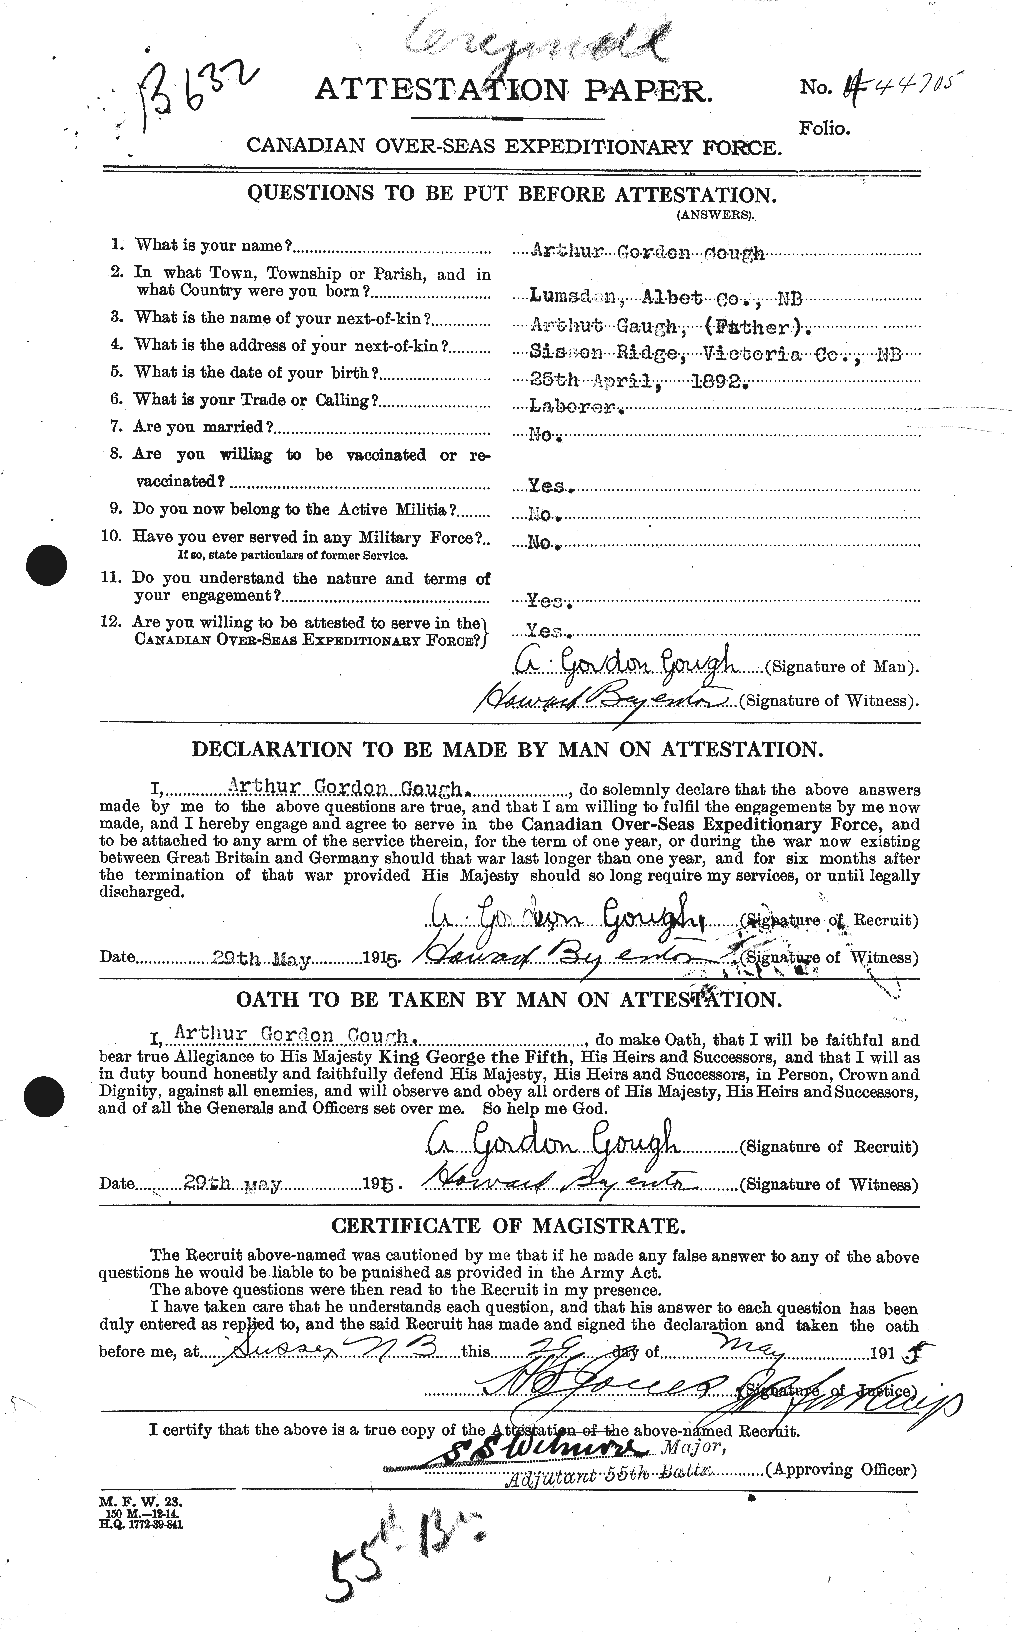 Personnel Records of the First World War - CEF 356370a